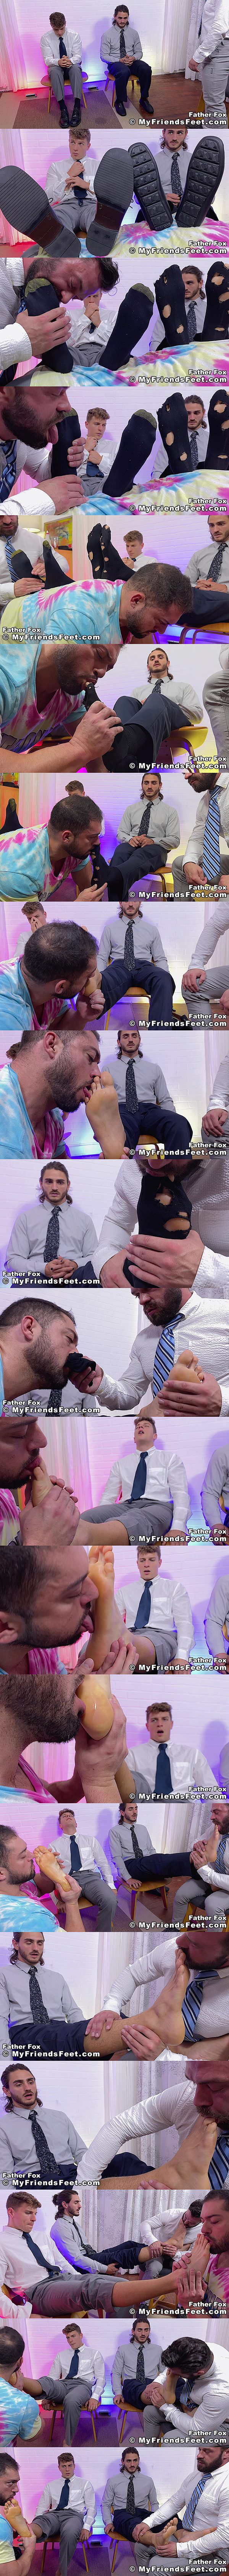 My Friends Feet - masculine daddies James Fox and Monstah Mike worship straight dudes Darius and Cyrus' socks and bare feet 02